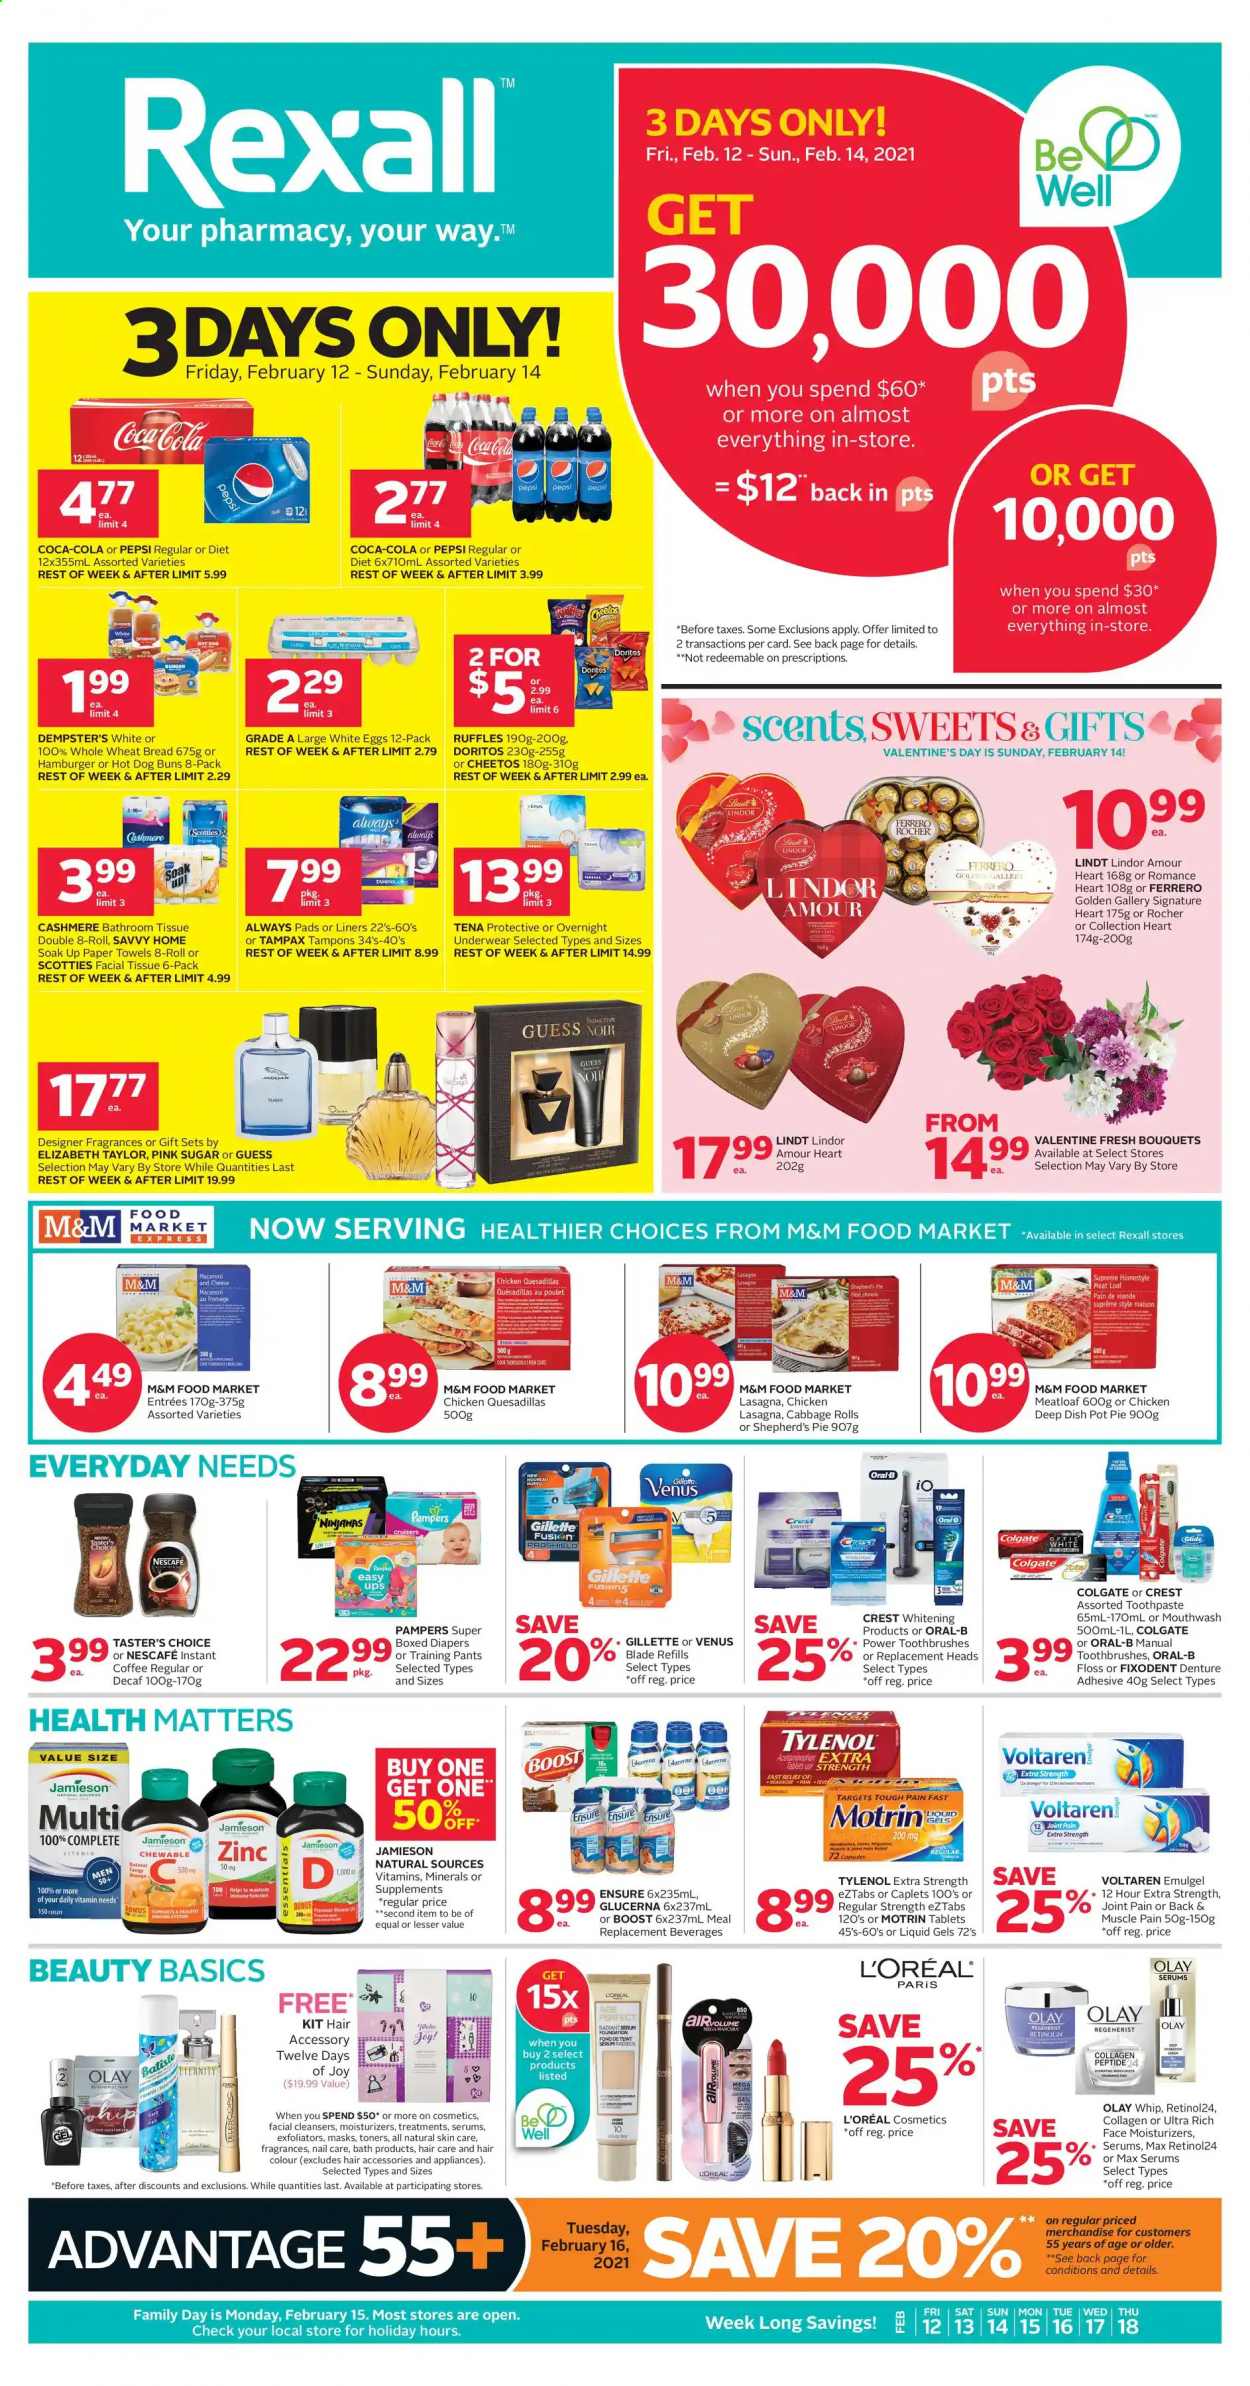 thumbnail - Rexall Flyer - February 12, 2021 - February 18, 2021 - Sales products - Doritos, Cheetos, Ruffles, sugar, cabbage, Ace, Coca-Cola, Pepsi, Boost, instant coffee, pants, nappies, baby pants, bath tissue, kitchen towels, paper towels, Joy, toothpaste, mouthwash, Fixodent, Crest, Always pads, sanitary pads, tampons, L’Oréal, moisturizer, serum, Olay, hair color, Guess, Venus, pot, Tylenol, Glucerna, zinc, Motrin, Gillette, Tampax, Pampers, Oral-B, Nescafé, M&M's. Page 1.